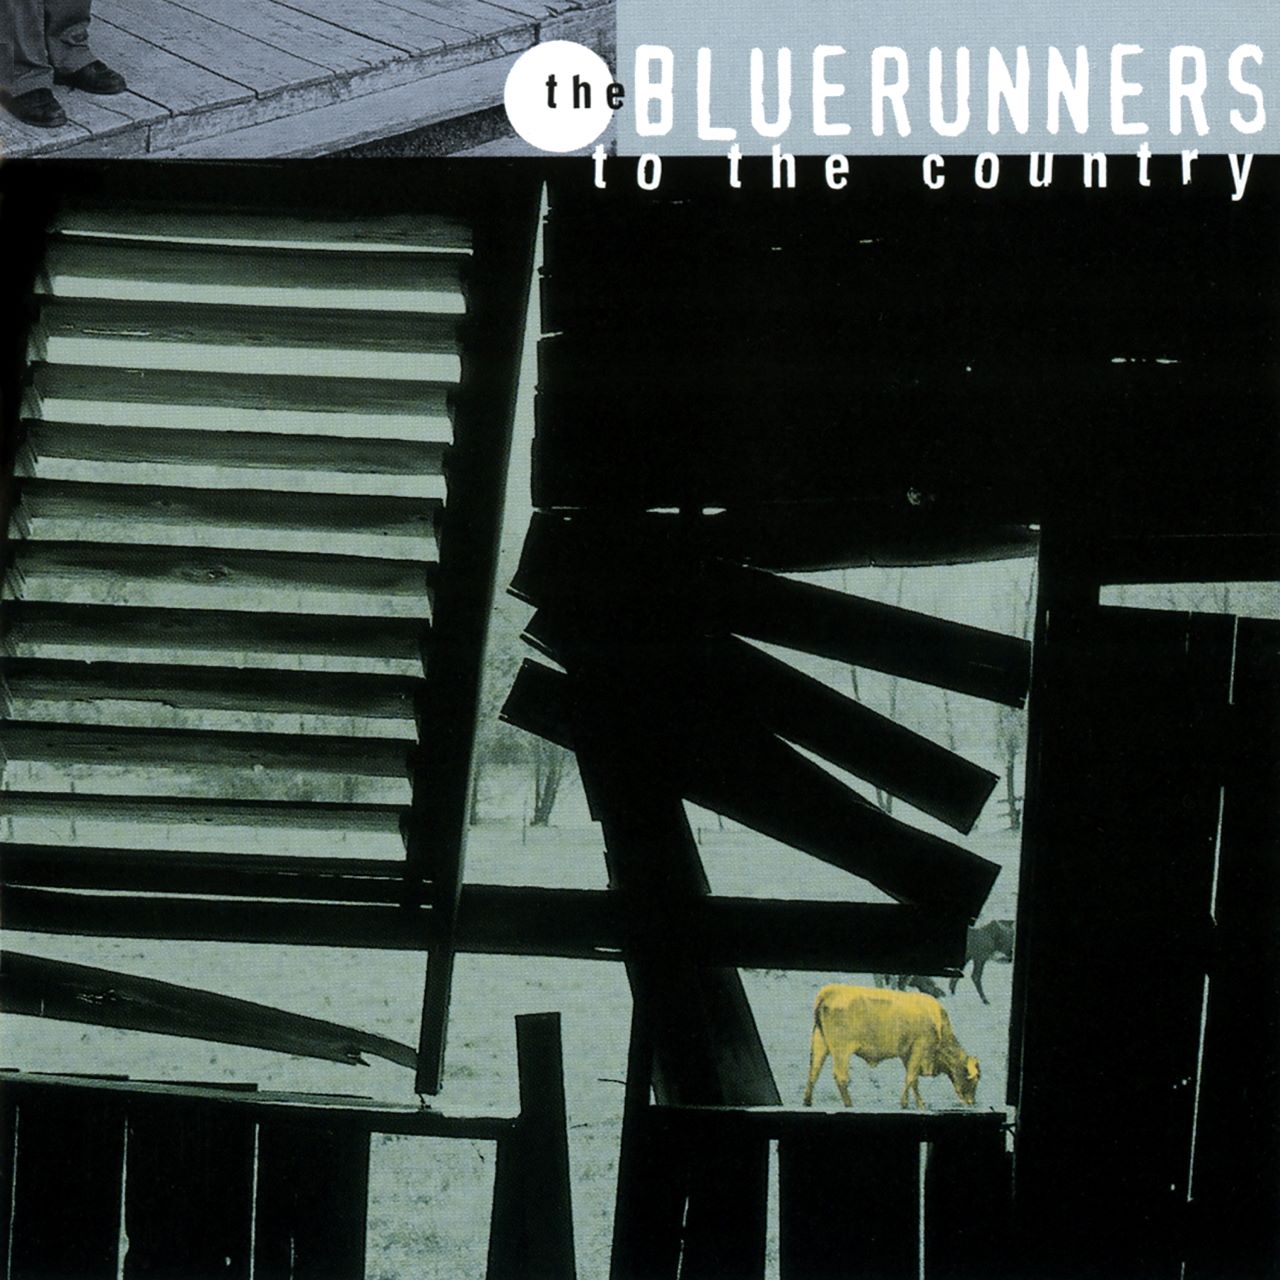 Bluerunners - To The Country cover album